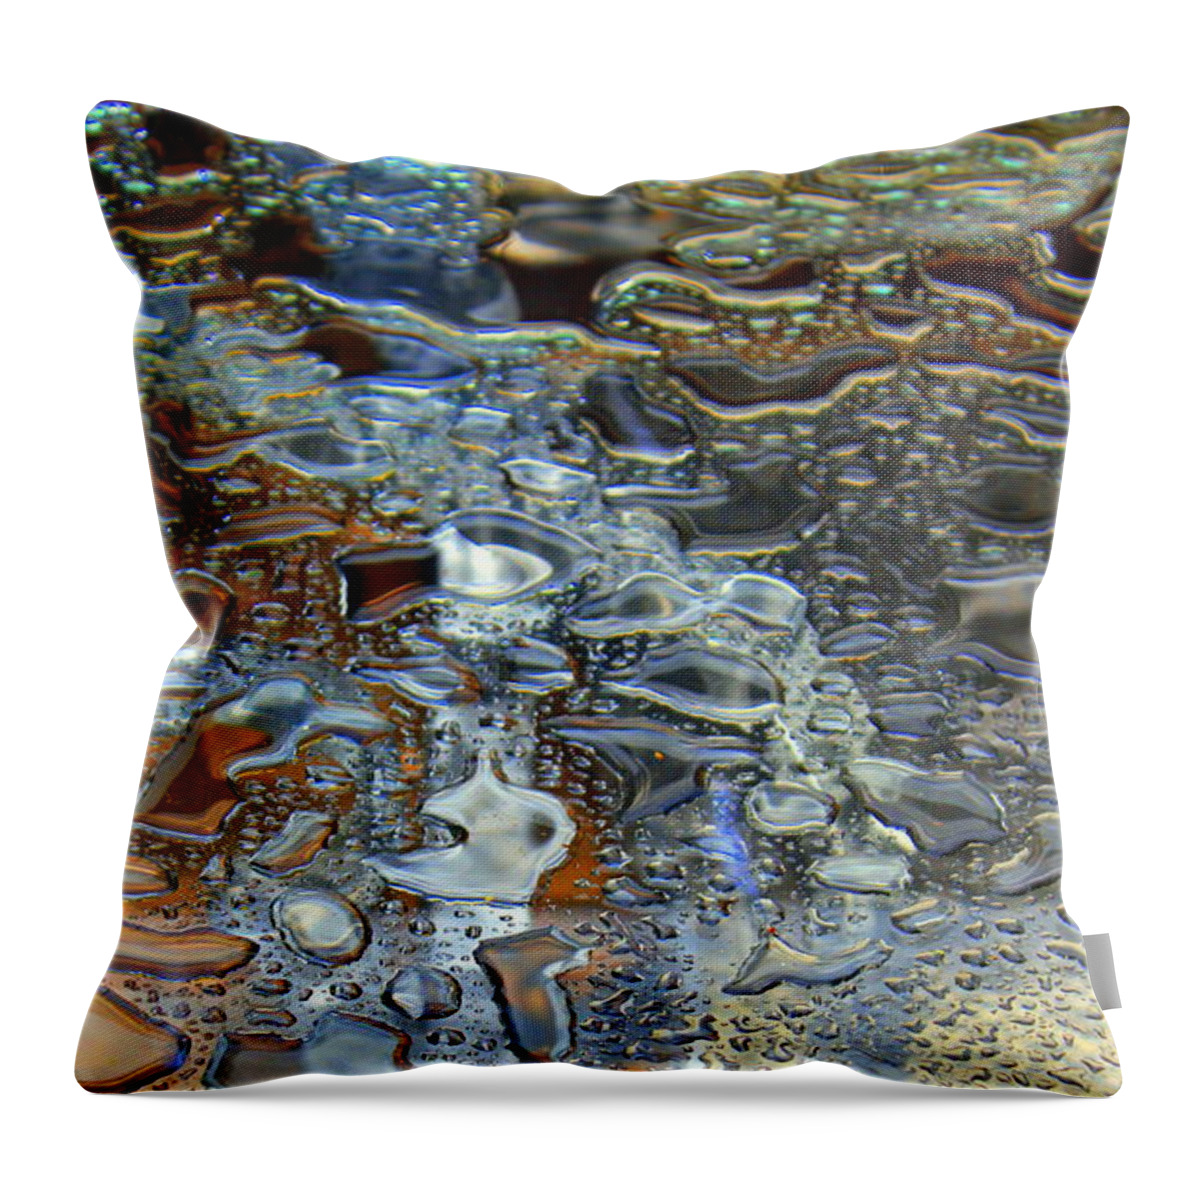 Jeweld Throw Pillow featuring the photograph Bejeweled by Deborah Crew-Johnson